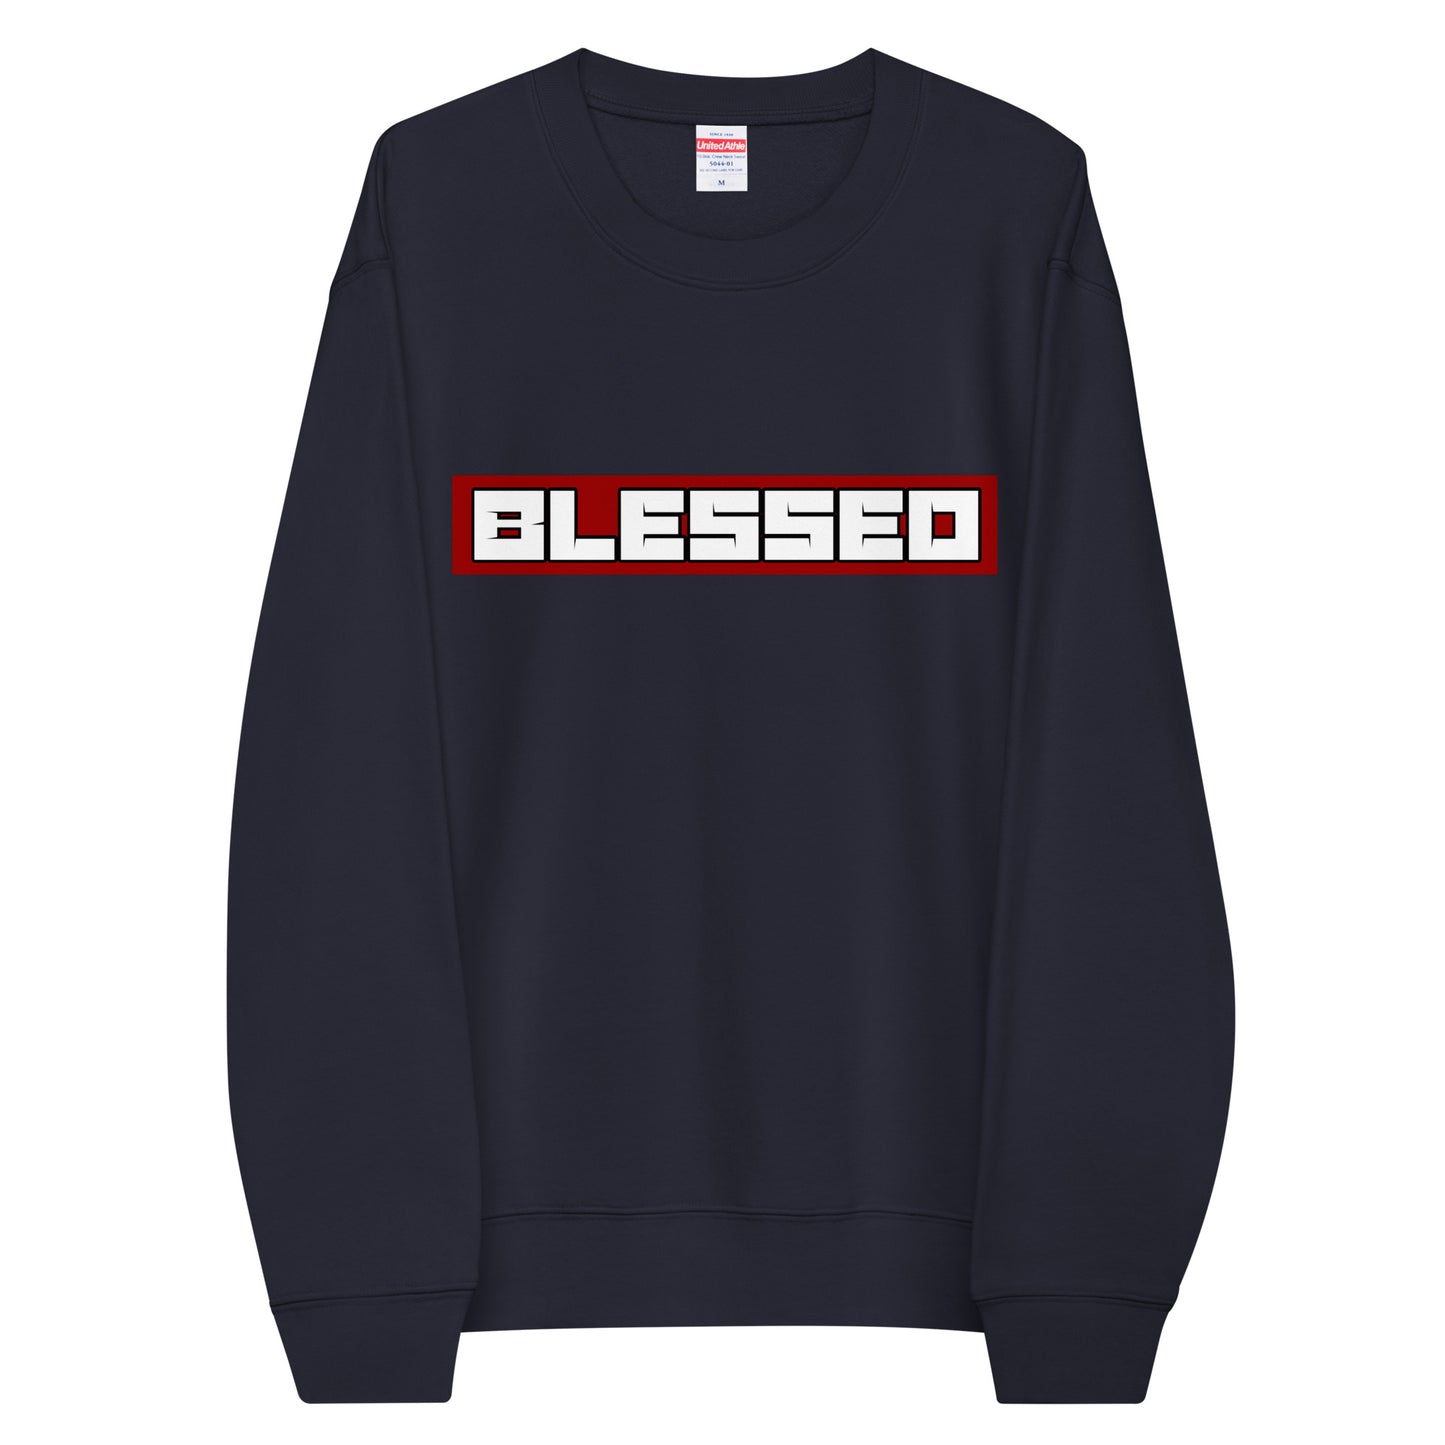 BLESSED NAVY SWEATER